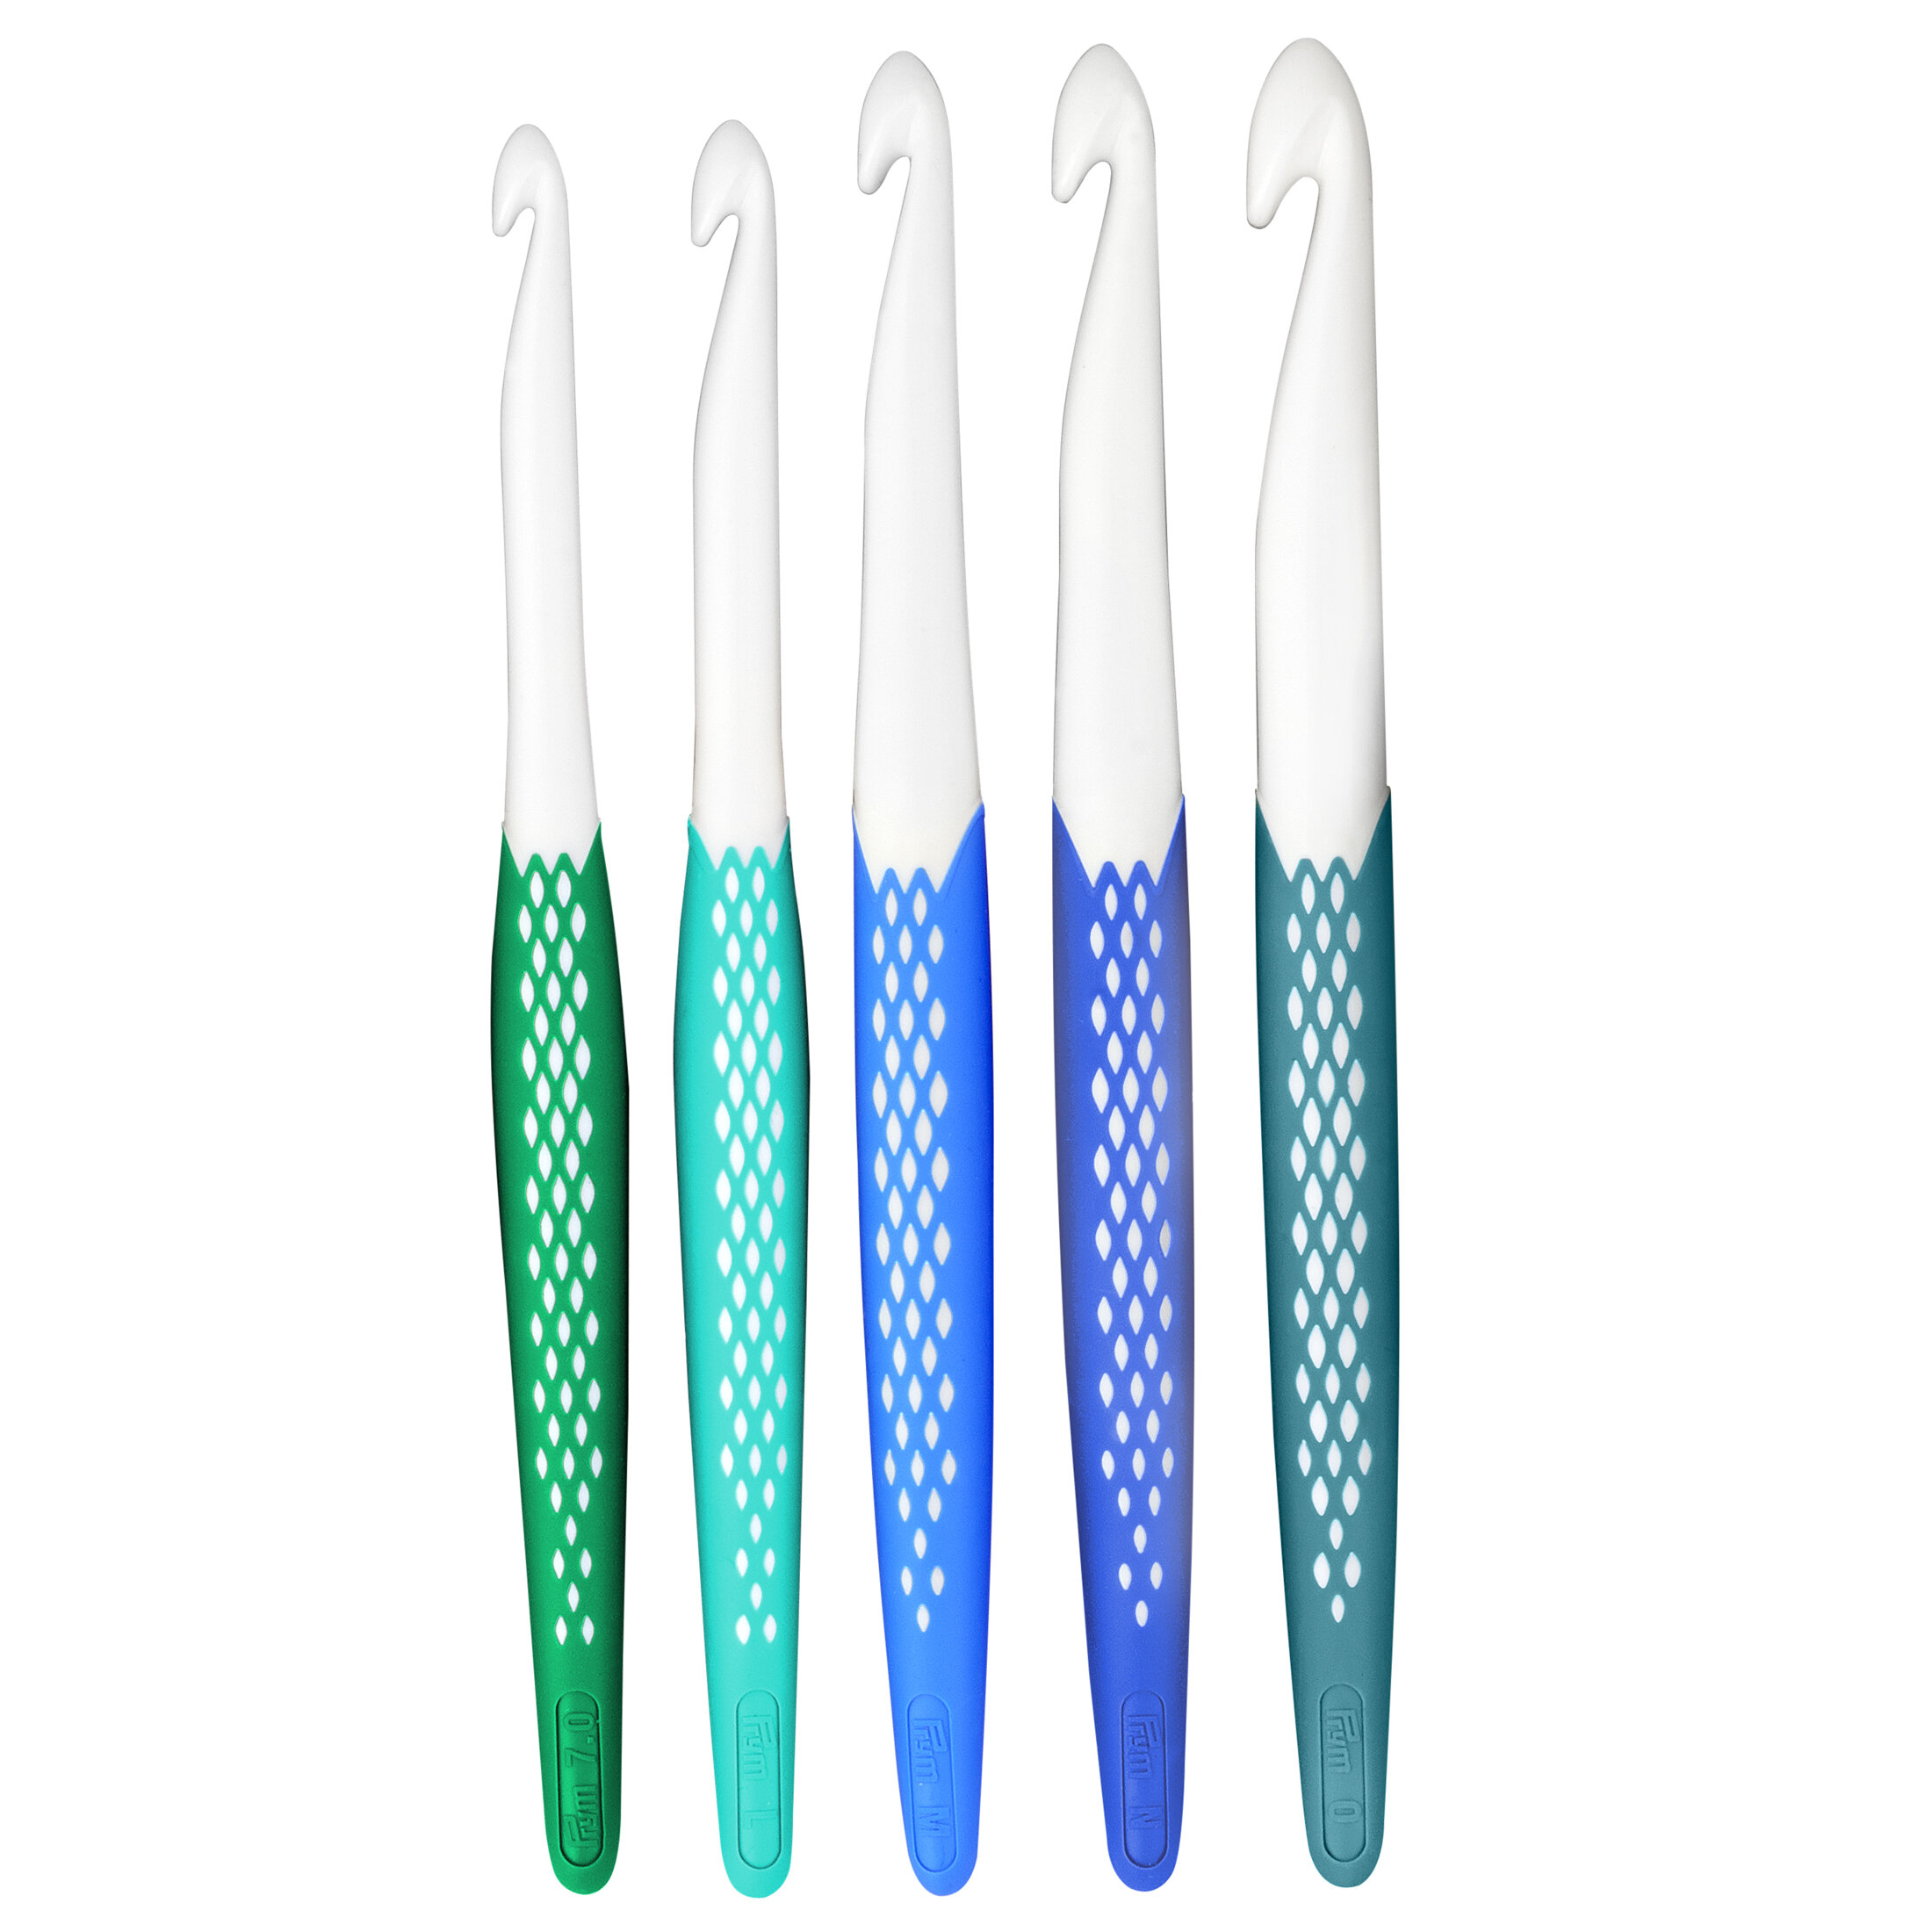 Crochet Hooks - Comfortable and Durable for Hand Fatigue